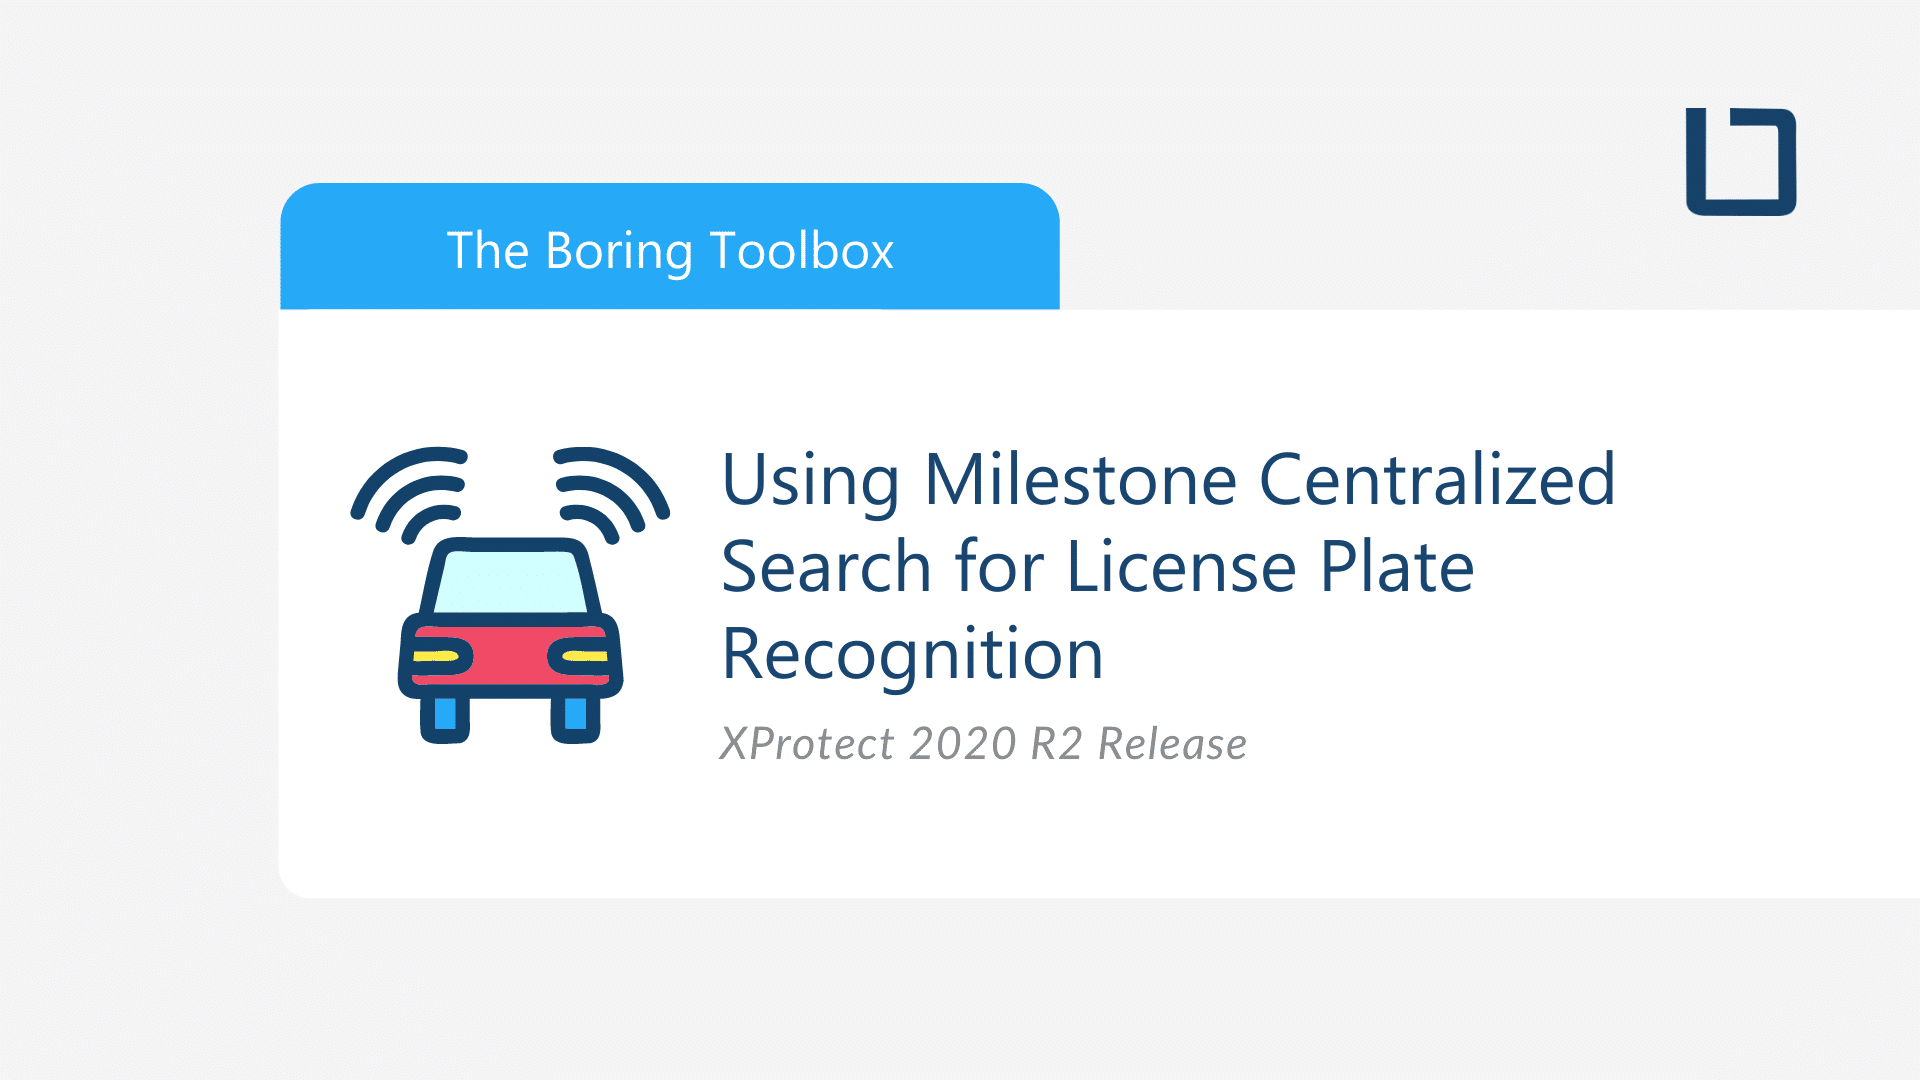 Using Milestone Centralized Search for License Plate Recognition – XProtect 2020 R2 Release